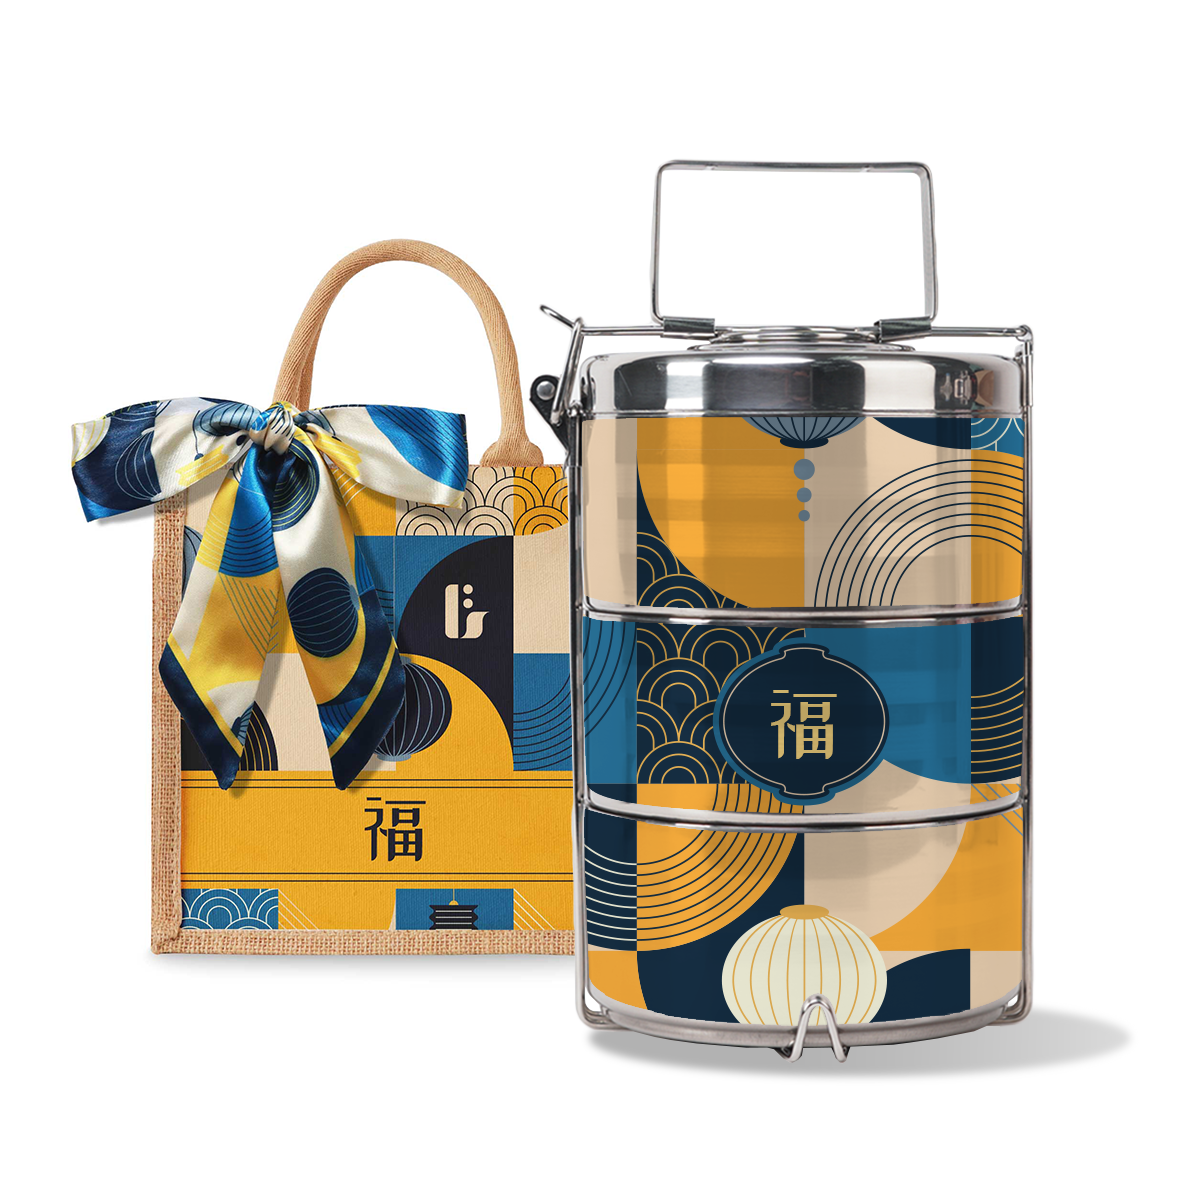 Lunar Blessing (Navy Design) - Lunch Tote Bag with Three-Tier Tiffin Carrier